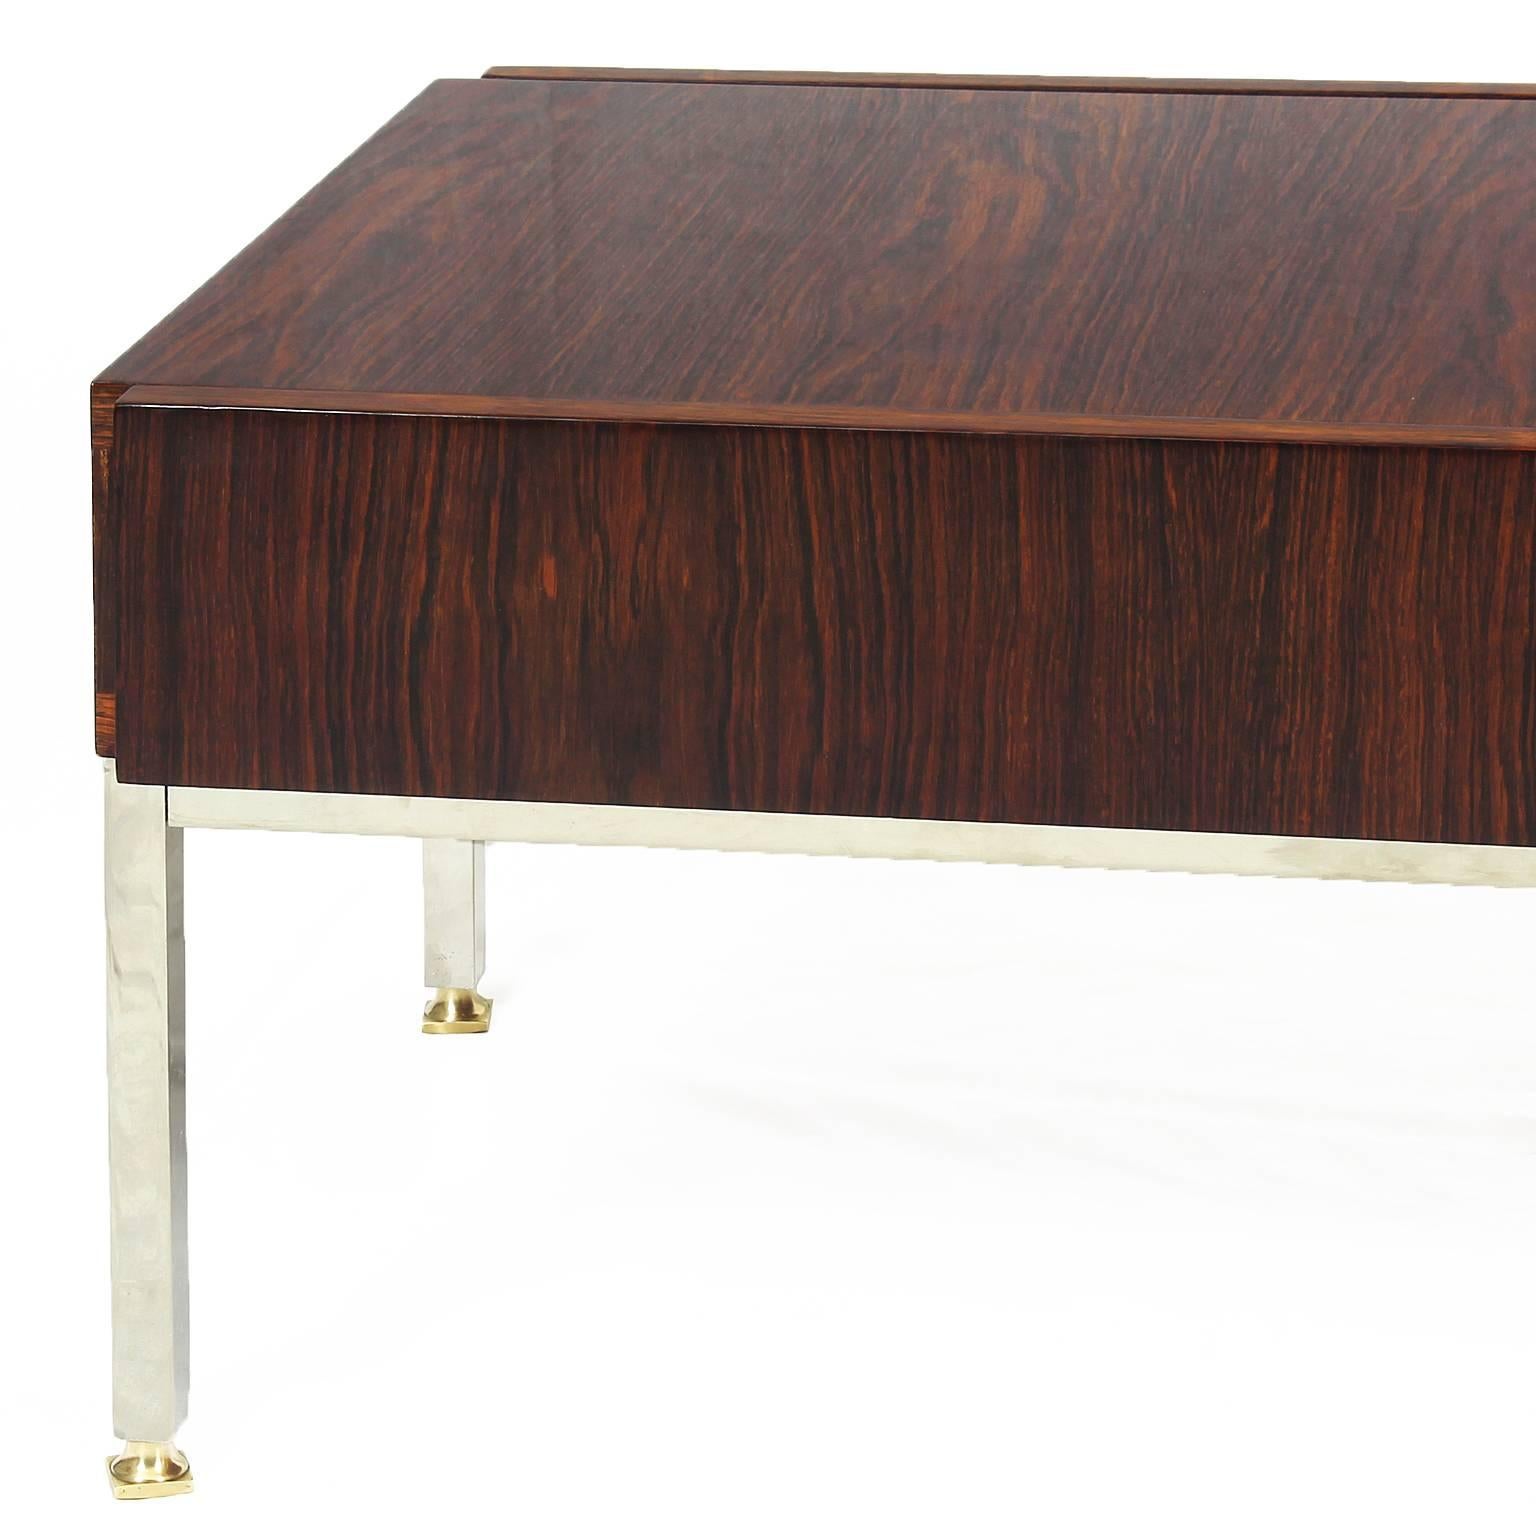 Plated Mid-Century Modern Coffee Table by Luigi Bartolini, Mahogany, 2 drawers - France For Sale